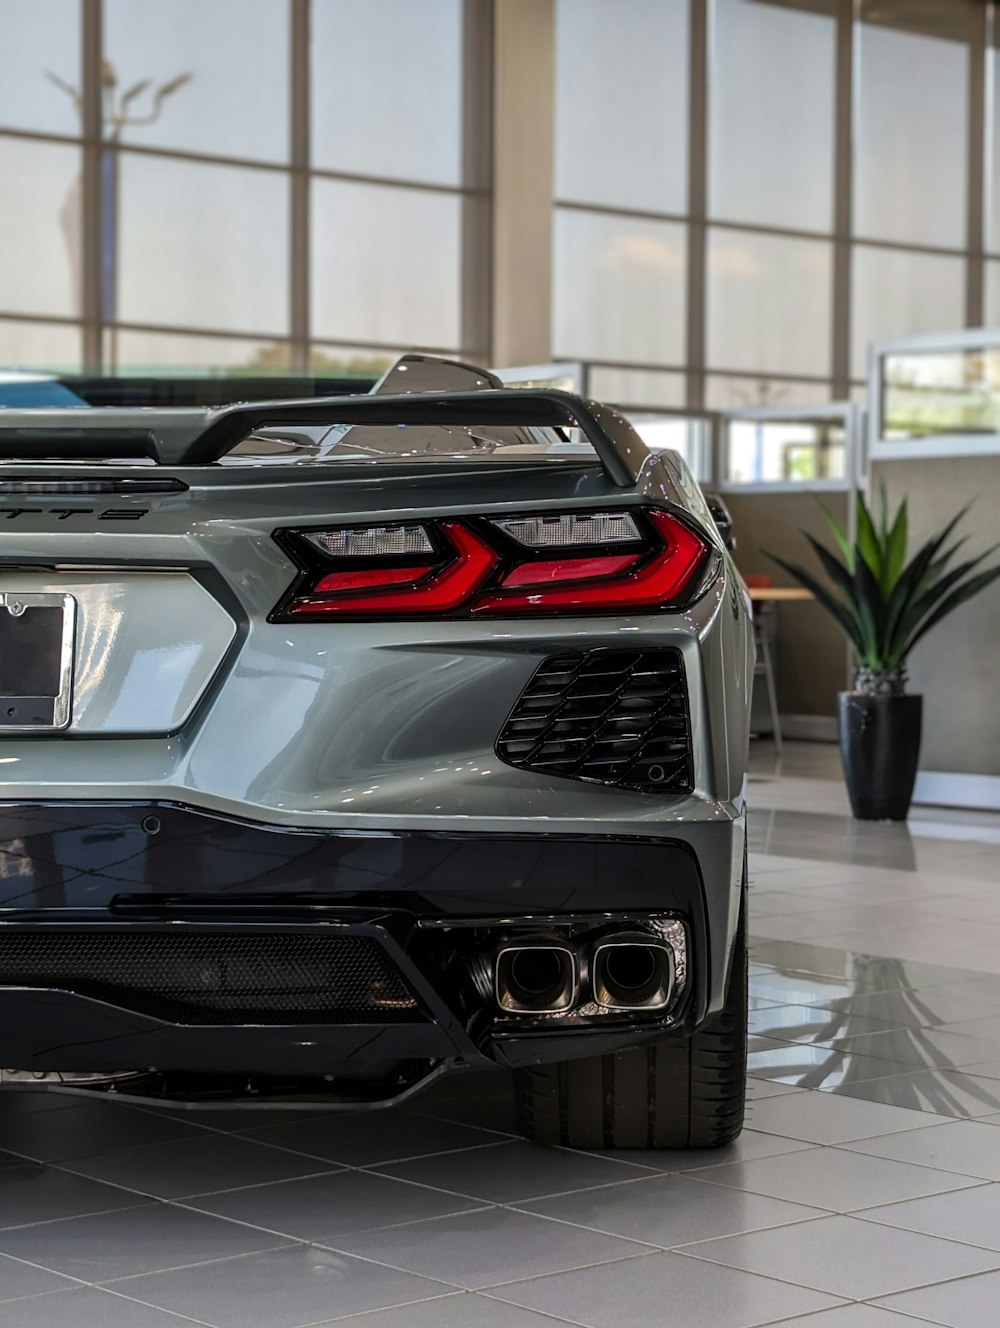 the rear end of a sports car in a showroom